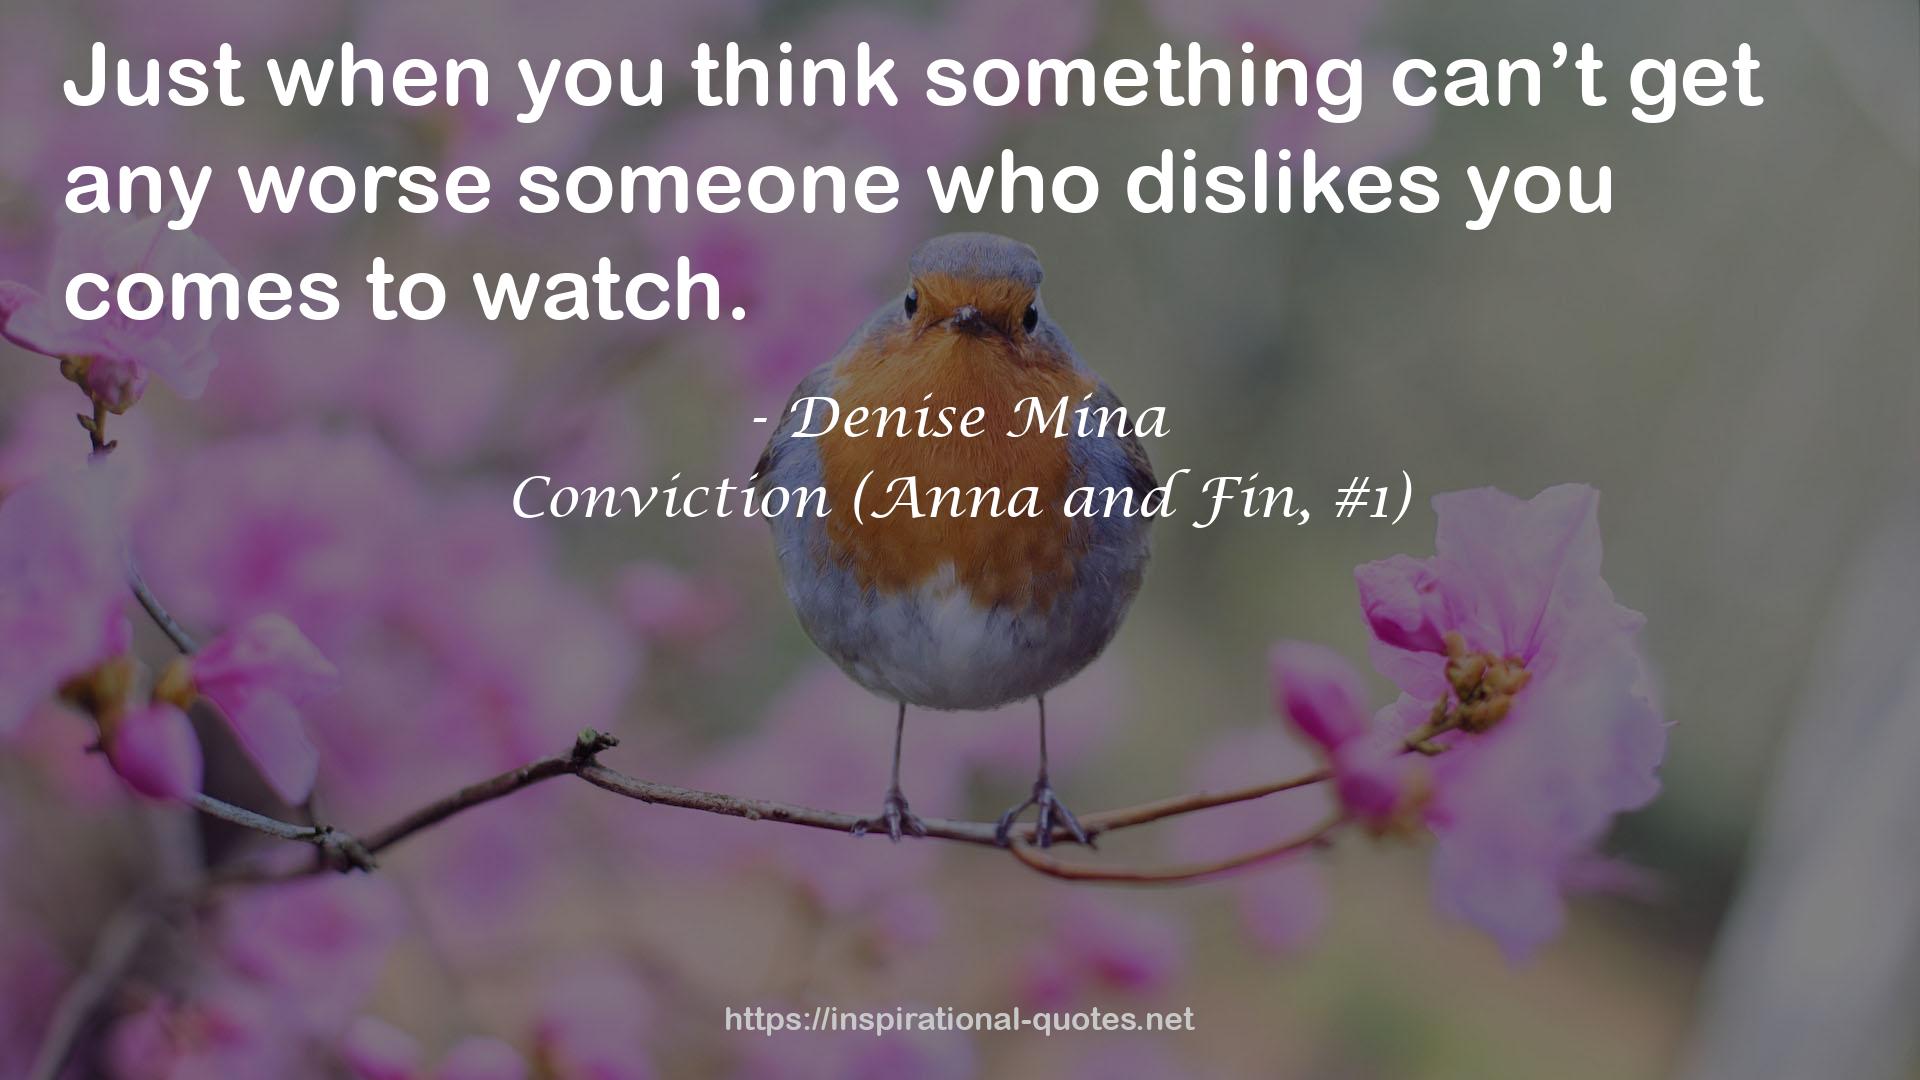 Conviction (Anna and Fin, #1) QUOTES